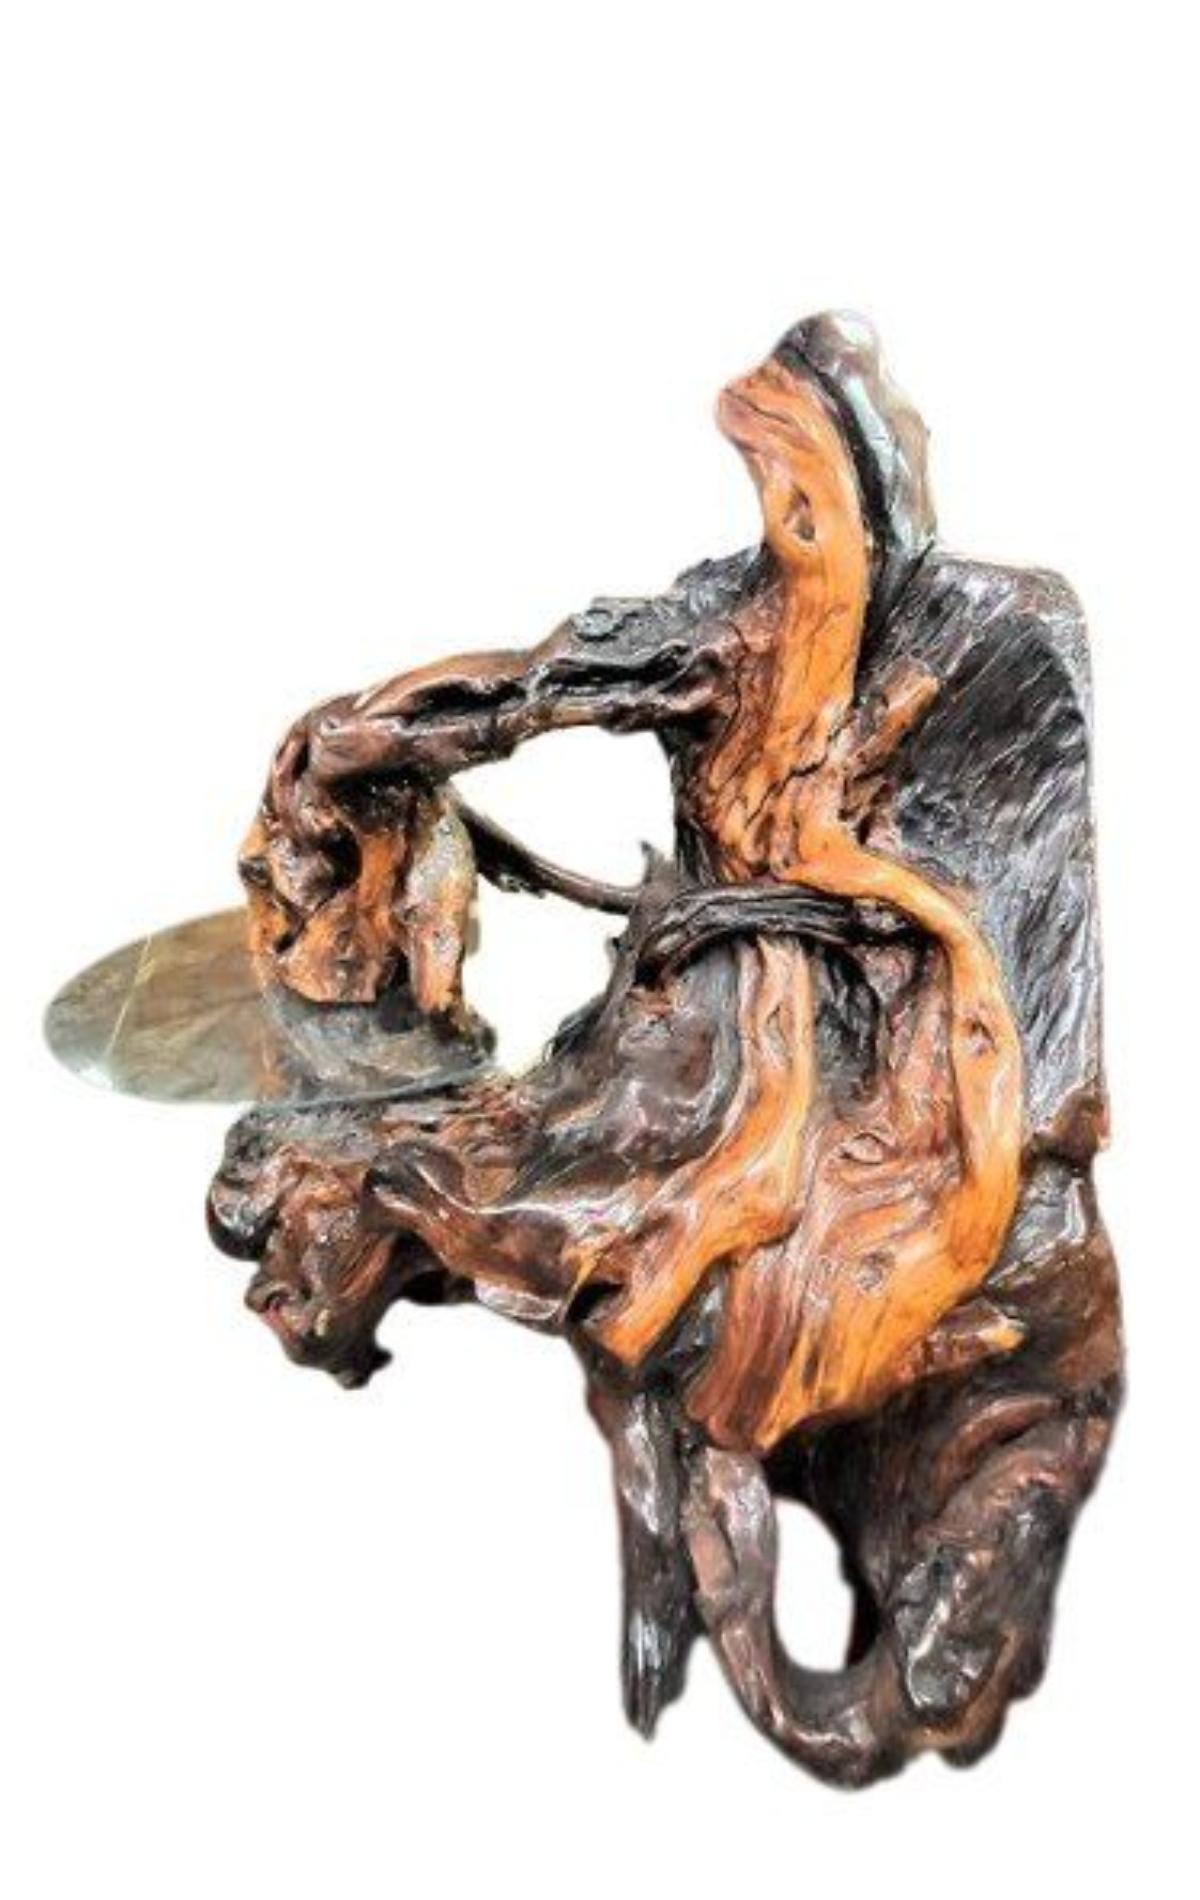 Magnificent Burl Wood Sculpture. The artist has made it into a decorative table by including a round piece of glass. Interesting rustic piece for your home or business.